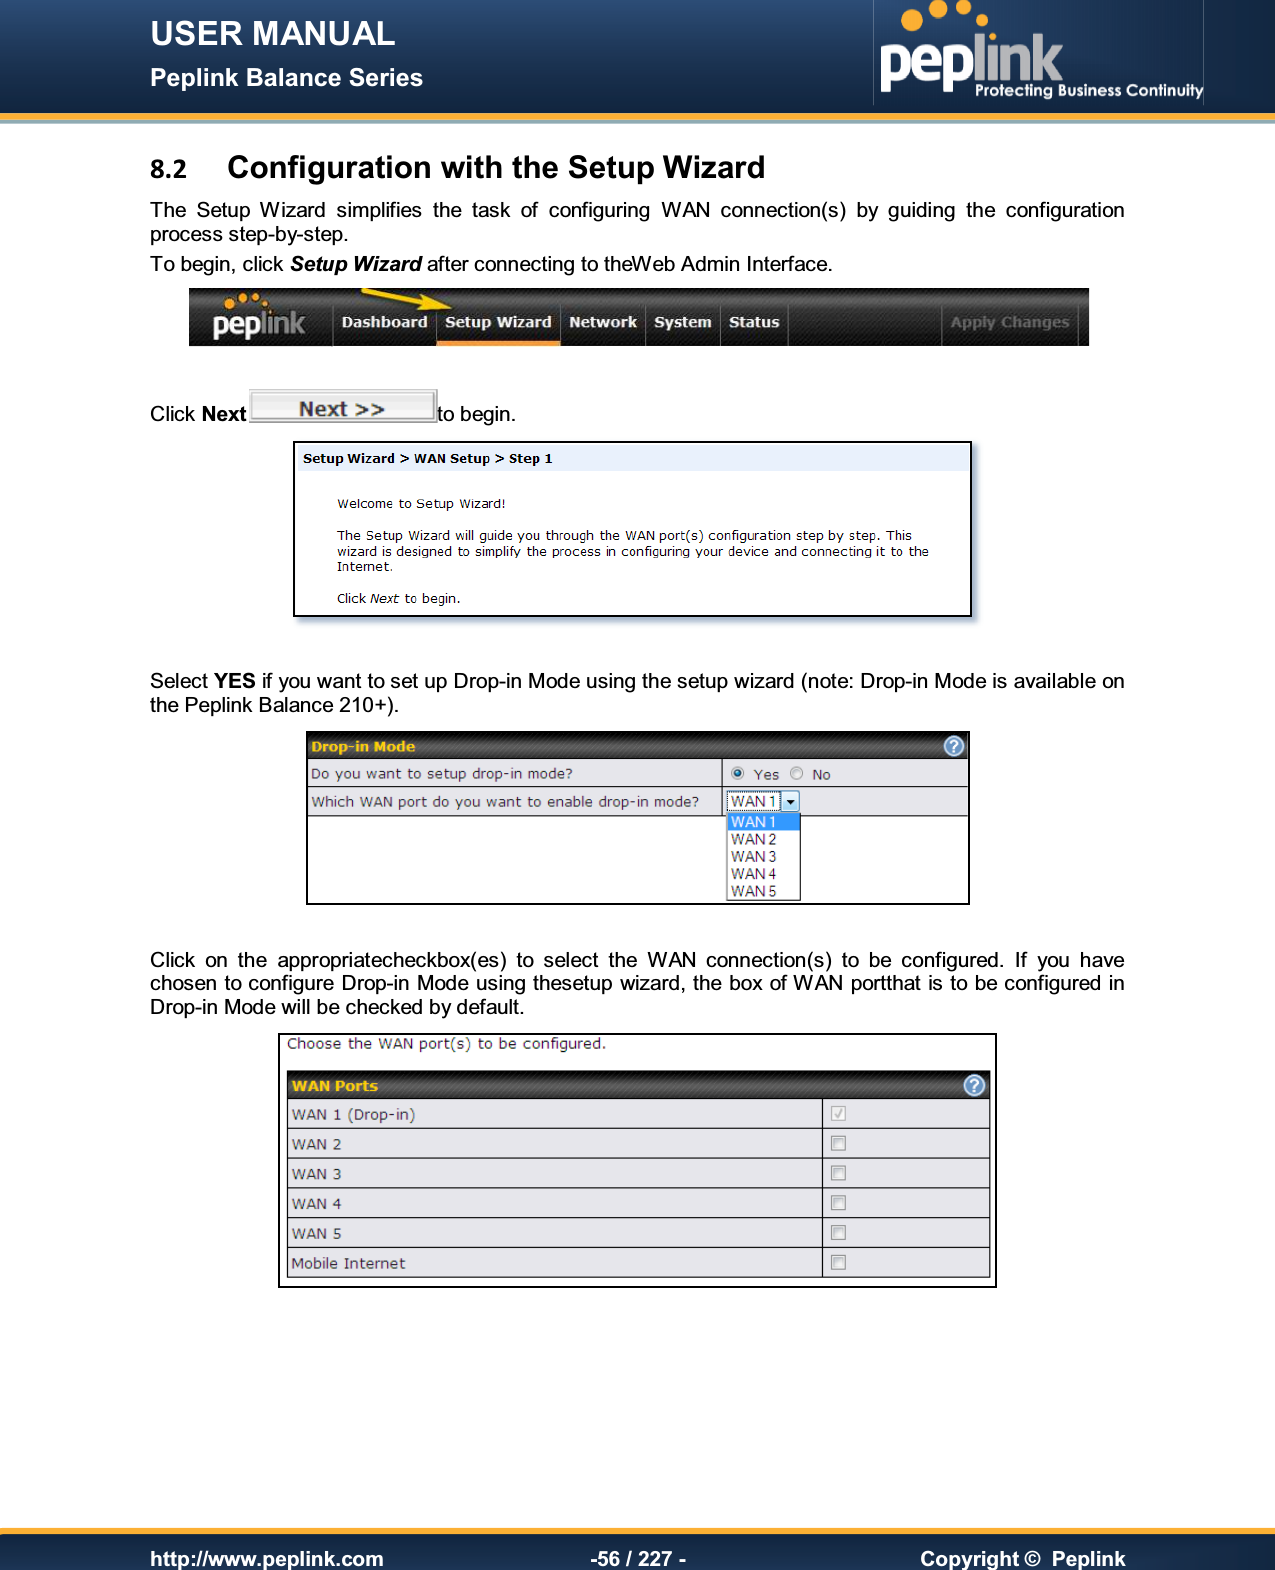 USER MANUAL Peplink Balance Series   http://www.peplink.com -56 / 227 -  Copyright ©  Peplink 8.2 Configuration with the Setup Wizard The  Setup  Wizard  simplifies  the  task  of  configuring  WAN  connection(s)  by  guiding  the  configuration process step-by-step. To begin, click Setup Wizard after connecting to theWeb Admin Interface.   Click Next to begin.   Select YES if you want to set up Drop-in Mode using the setup wizard (note: Drop-in Mode is available on the Peplink Balance 210+).   Click  on  the  appropriatecheckbox(es)  to  select  the  WAN  connection(s)  to  be  configured.  If  you  have chosen to configure Drop-in Mode using thesetup wizard, the box of WAN portthat is to be configured in Drop-in Mode will be checked by default.        